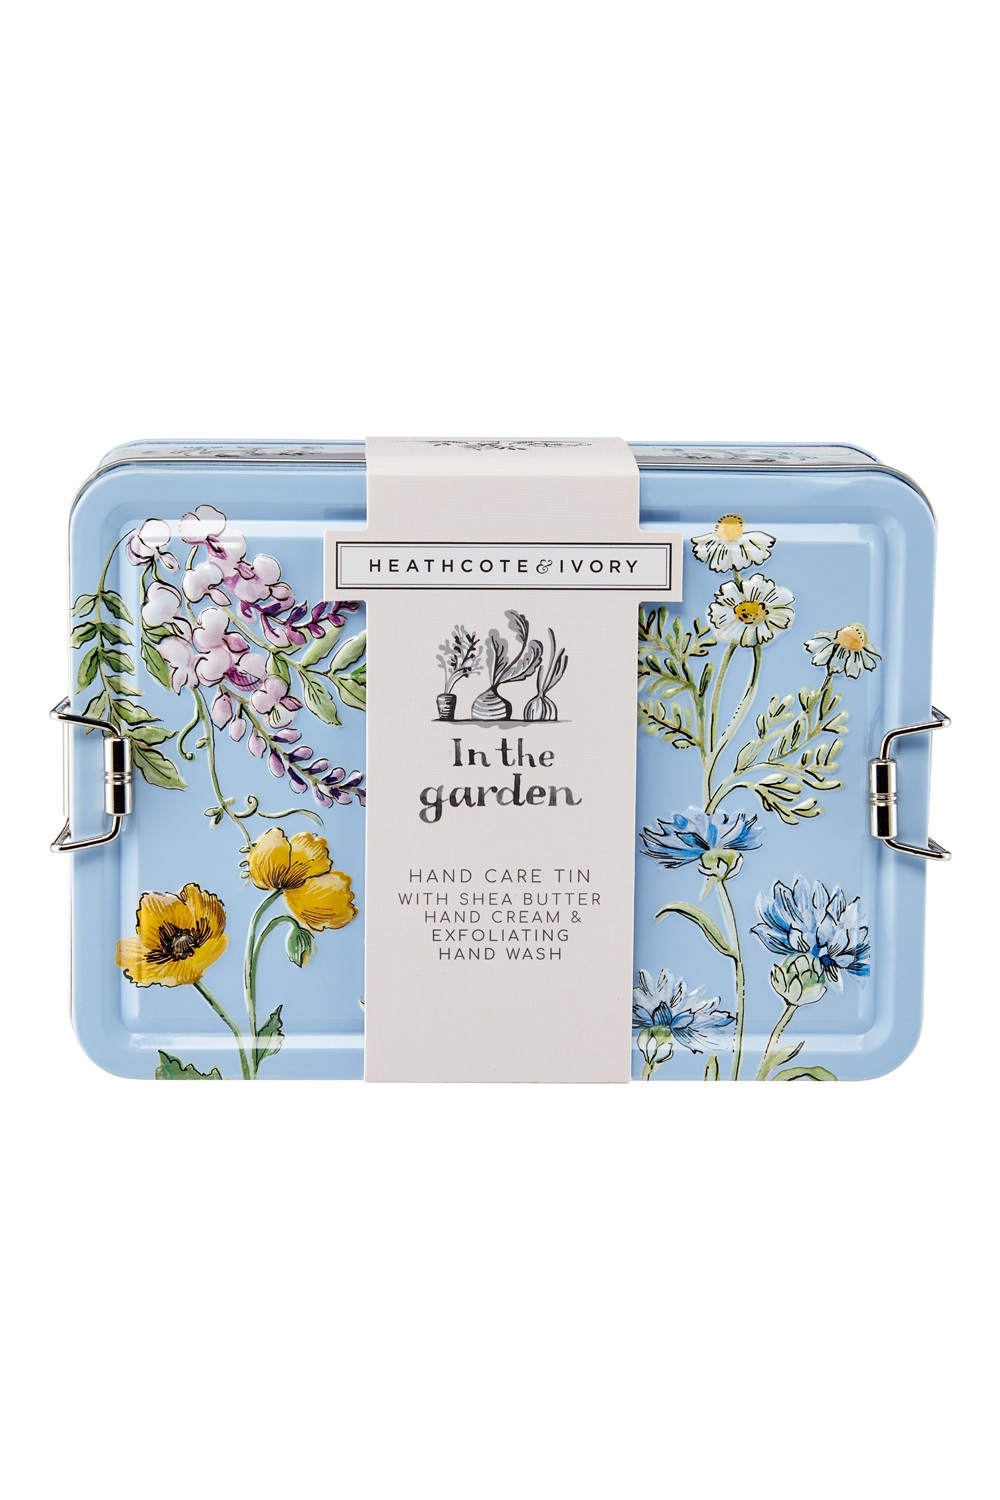  Heathcote & Ivory - In The Garden Hand Care Tin, Image 3 of 5